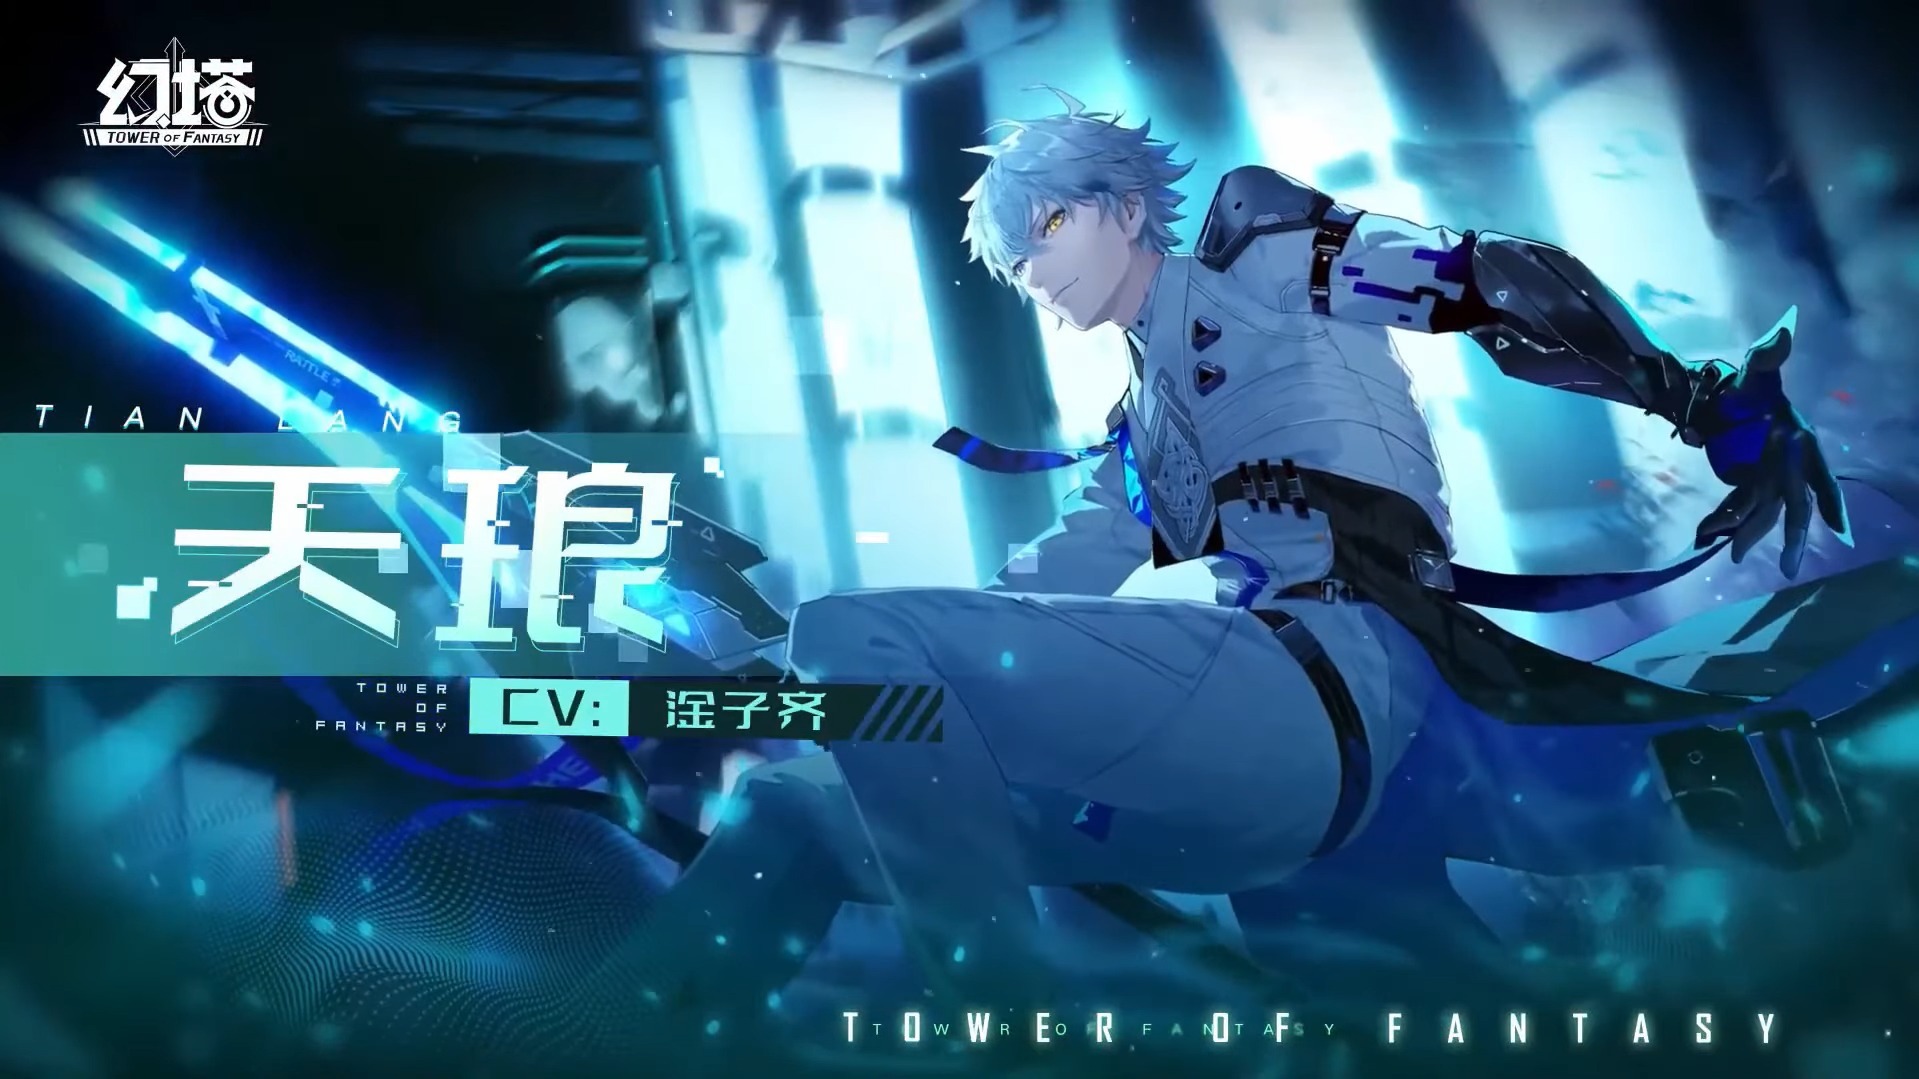 A kpop idol with actual ability? TOF is a crazy world. Tian Lang 2D art from the trailer.